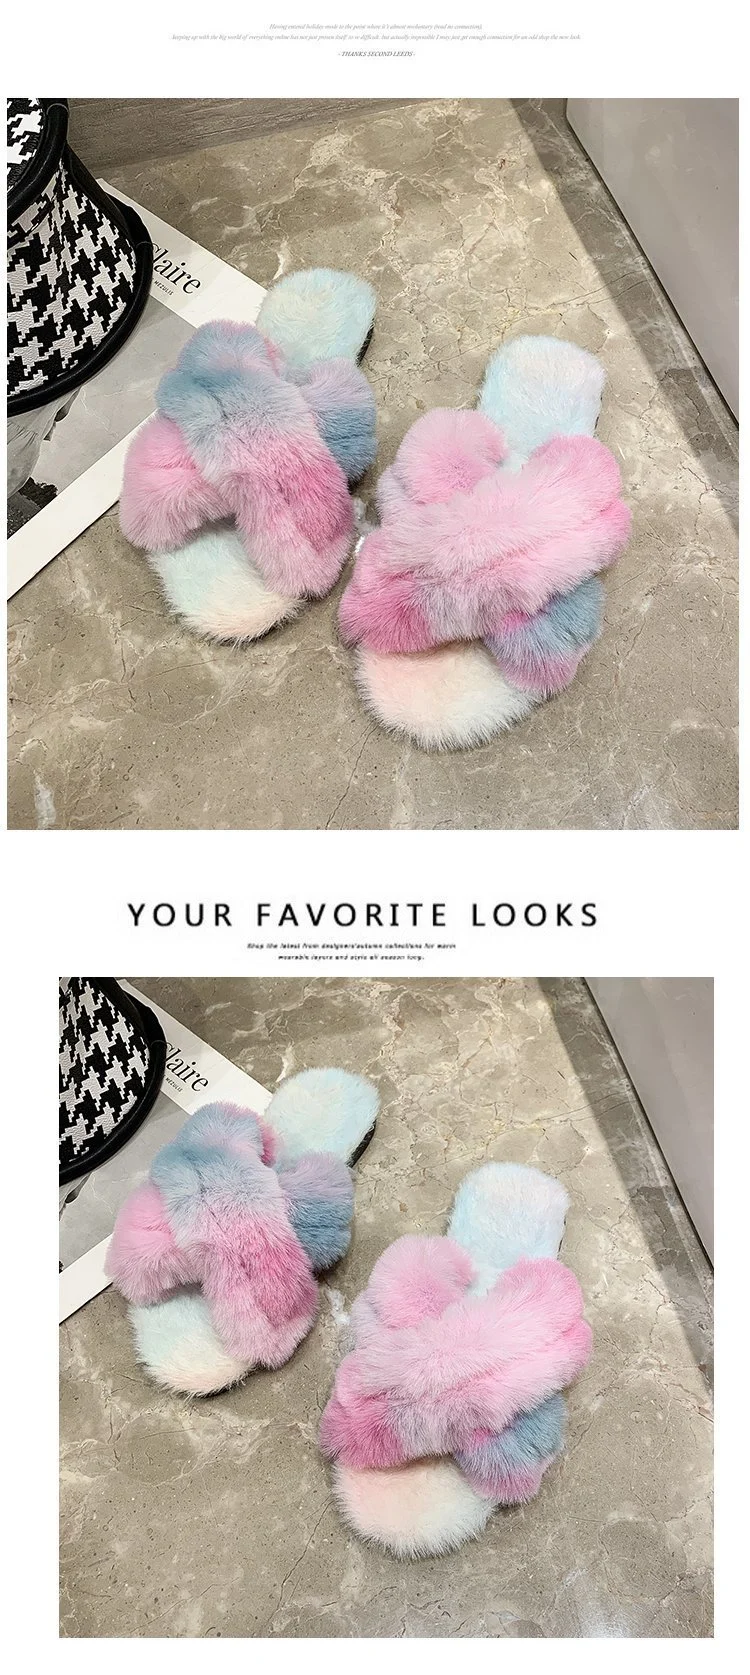 Cross Band Fur Slides, Wholesale Fur Slippers for Women, Colorful Fur Sandals Slippers